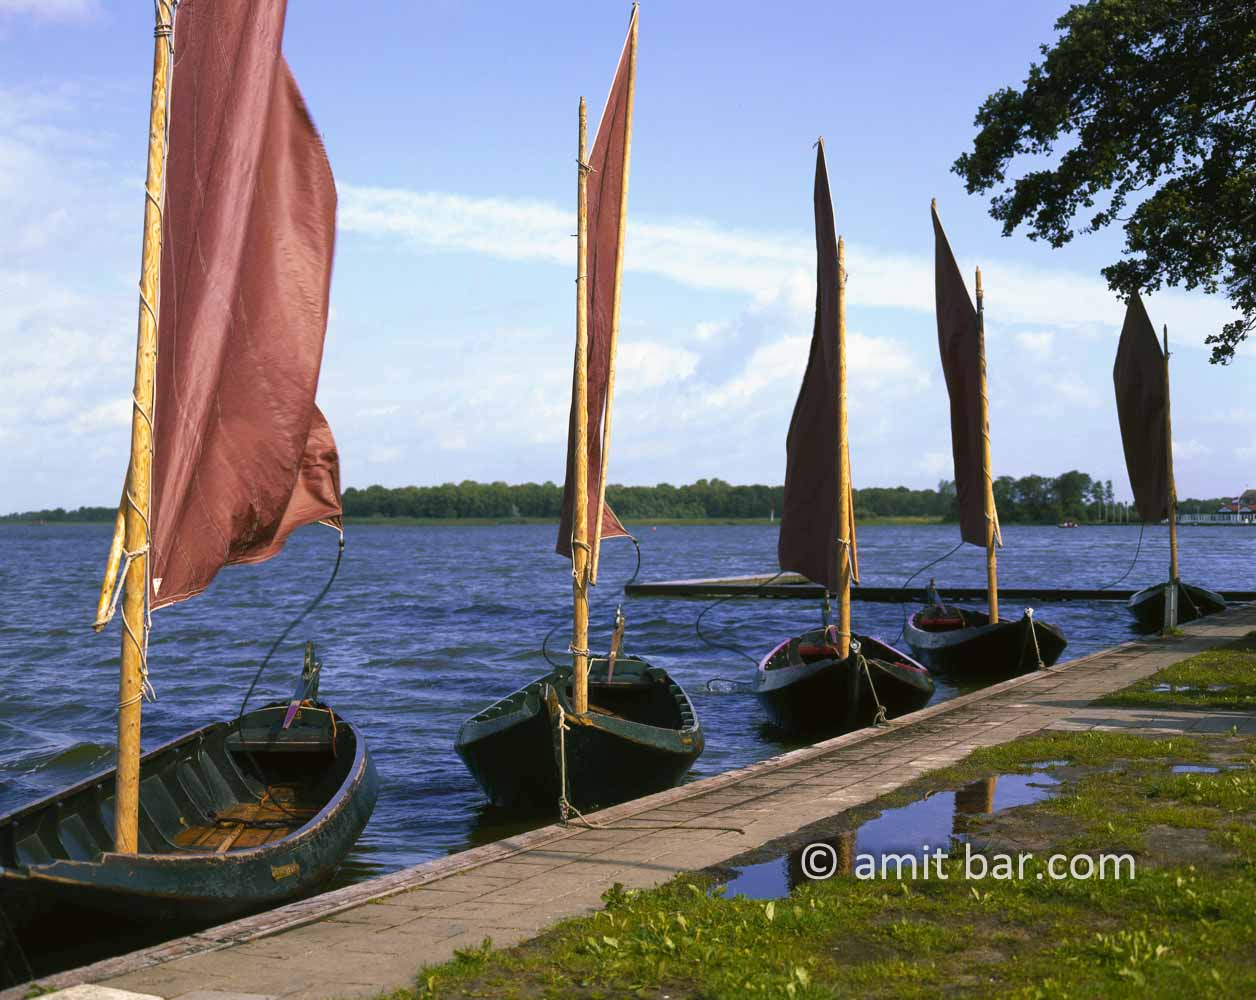 Boats and strong wind: skûtsjes (Frisian sailing boats) on lake by Giethorn, The Netherlands